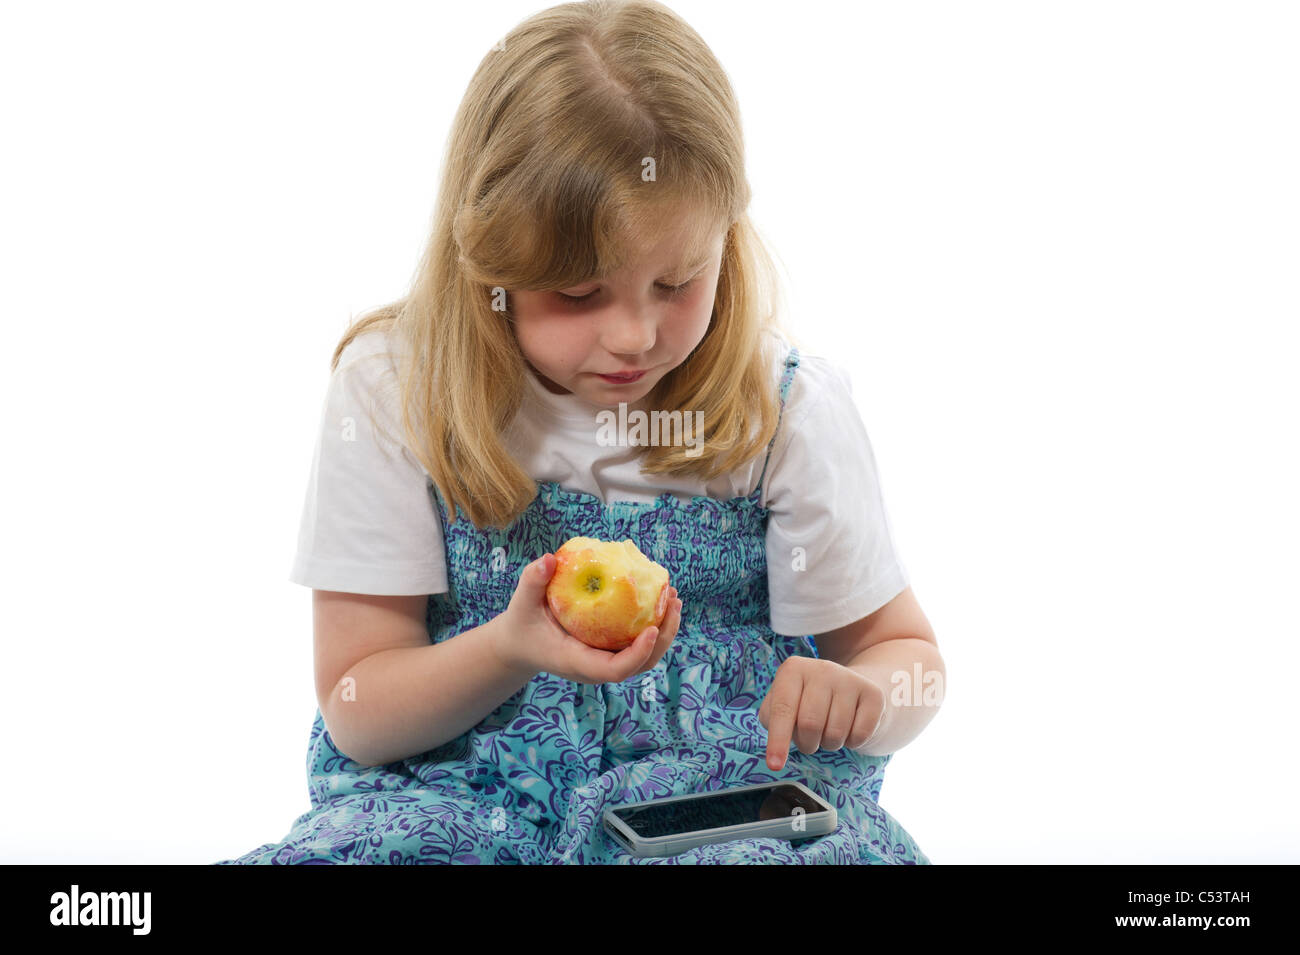 A young girl eight years playing with ipod/iphone while eating an apple against plain white studio background. Stock Photo